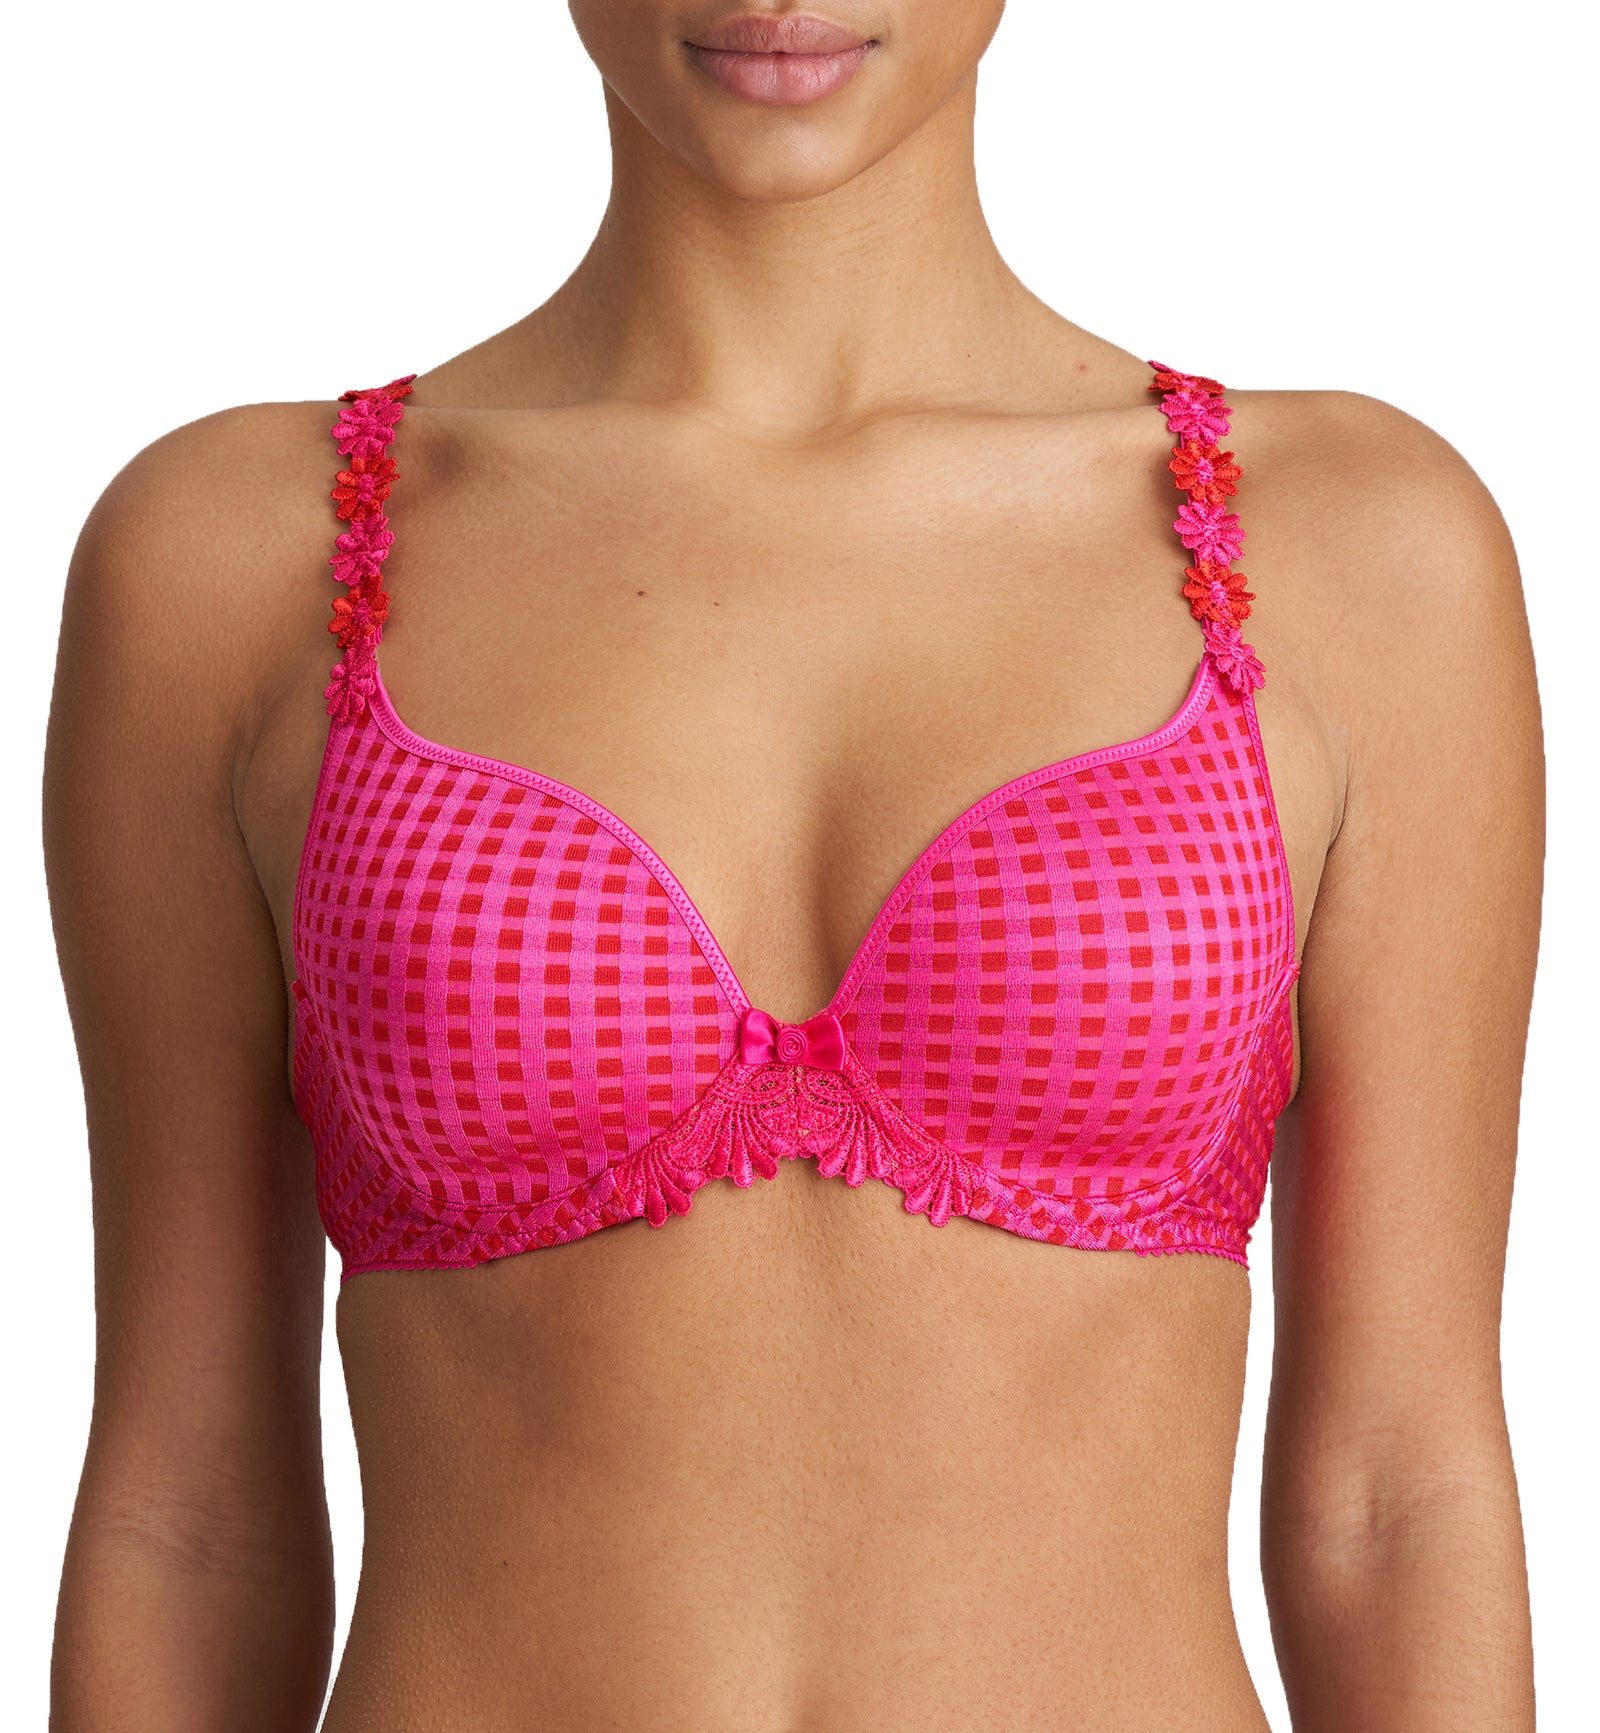 Marie Jo Avero Padded Convertible Underwire Bra (0100416),30D,Electric Pink - Electric Pink,30D